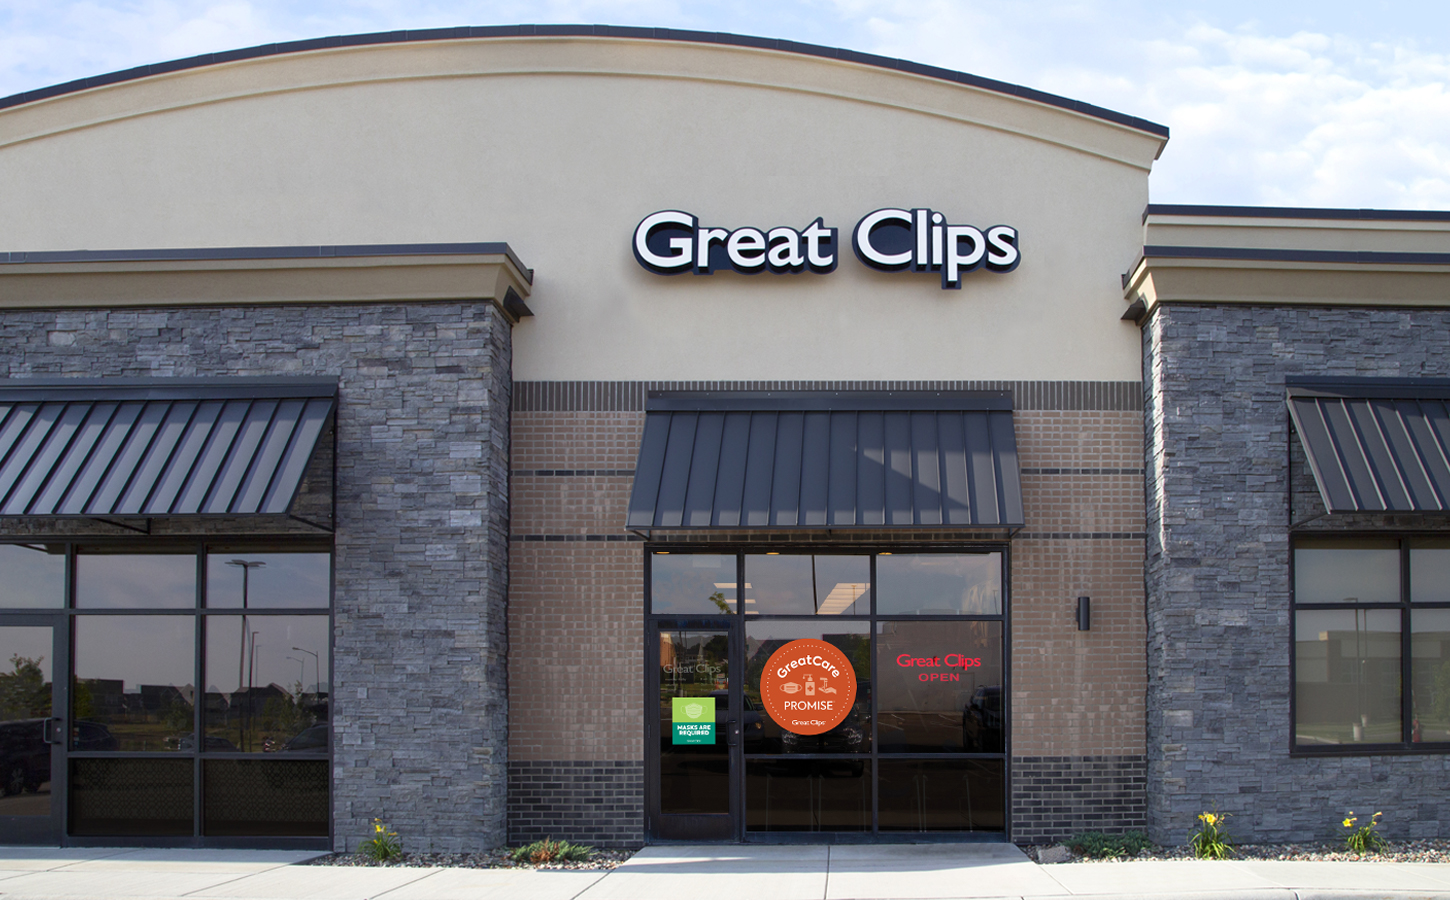 great clips - Great Clips Prombe